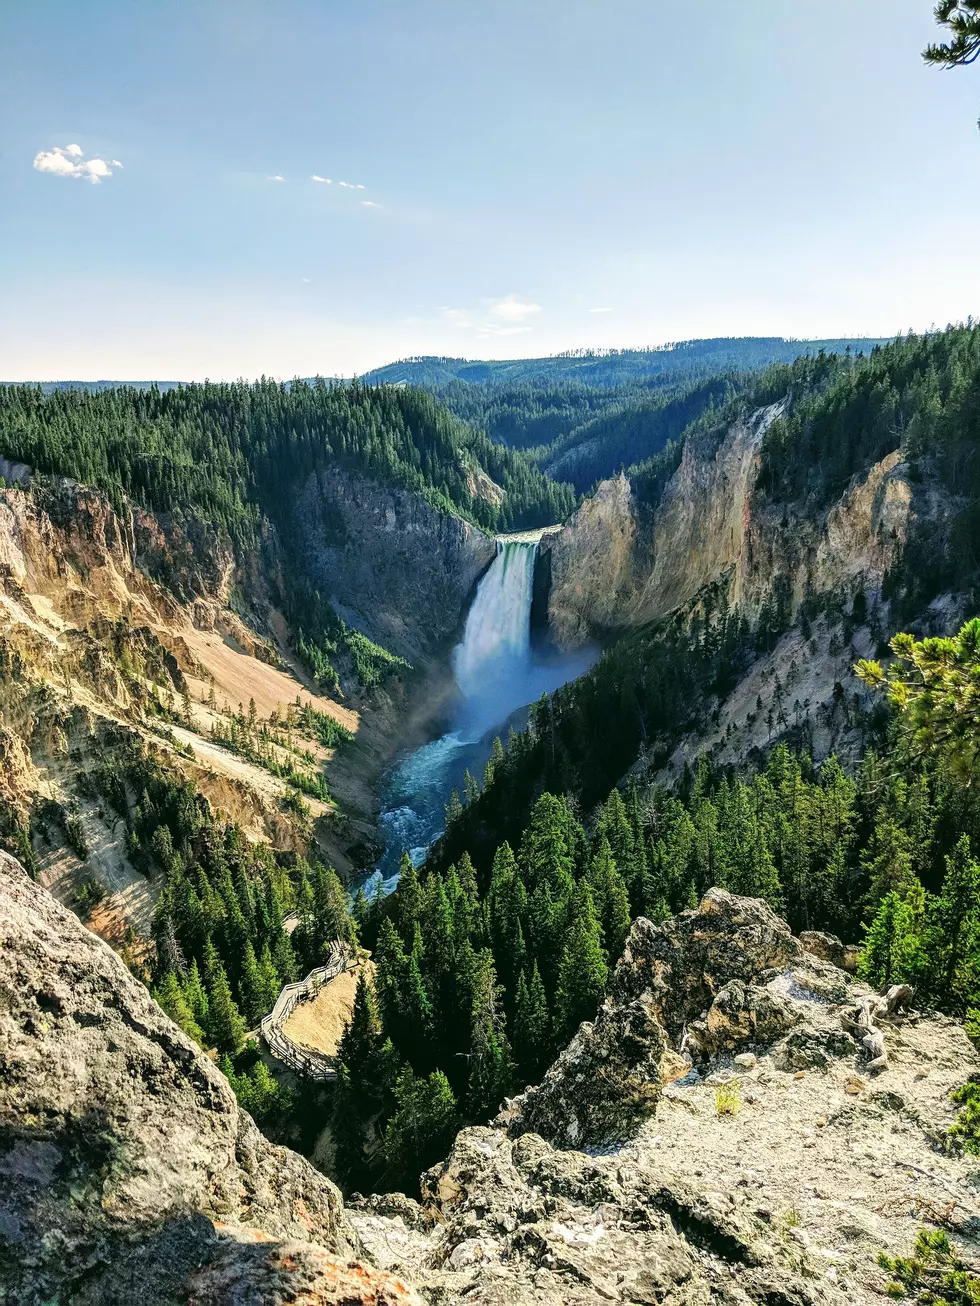 Yellowstone National Park Is Closed, But For How Long?